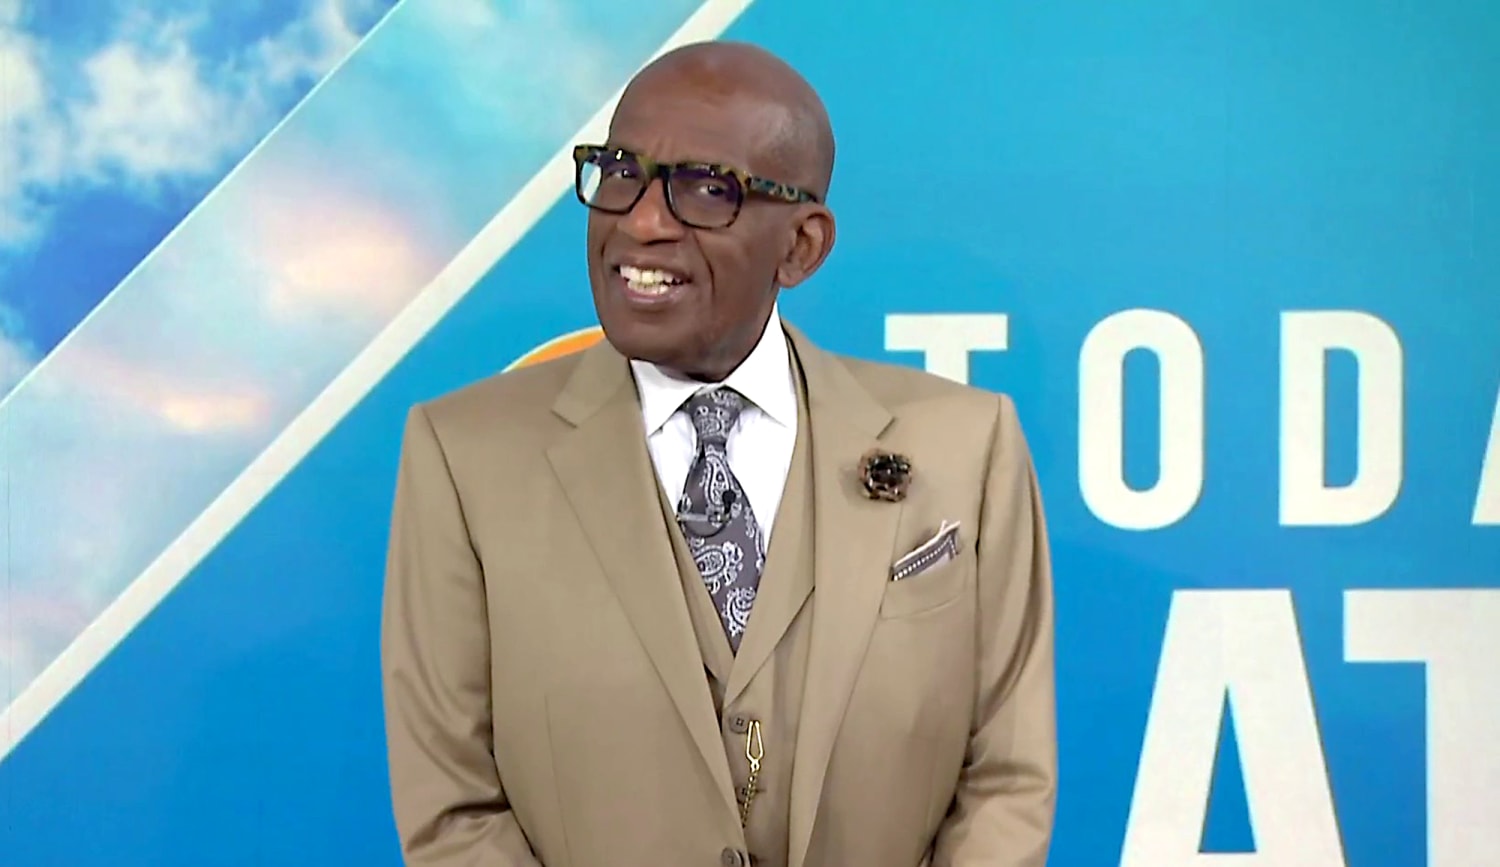 Al Roker returns to 'TODAY' after total knee replacement surgery: ‘All good’